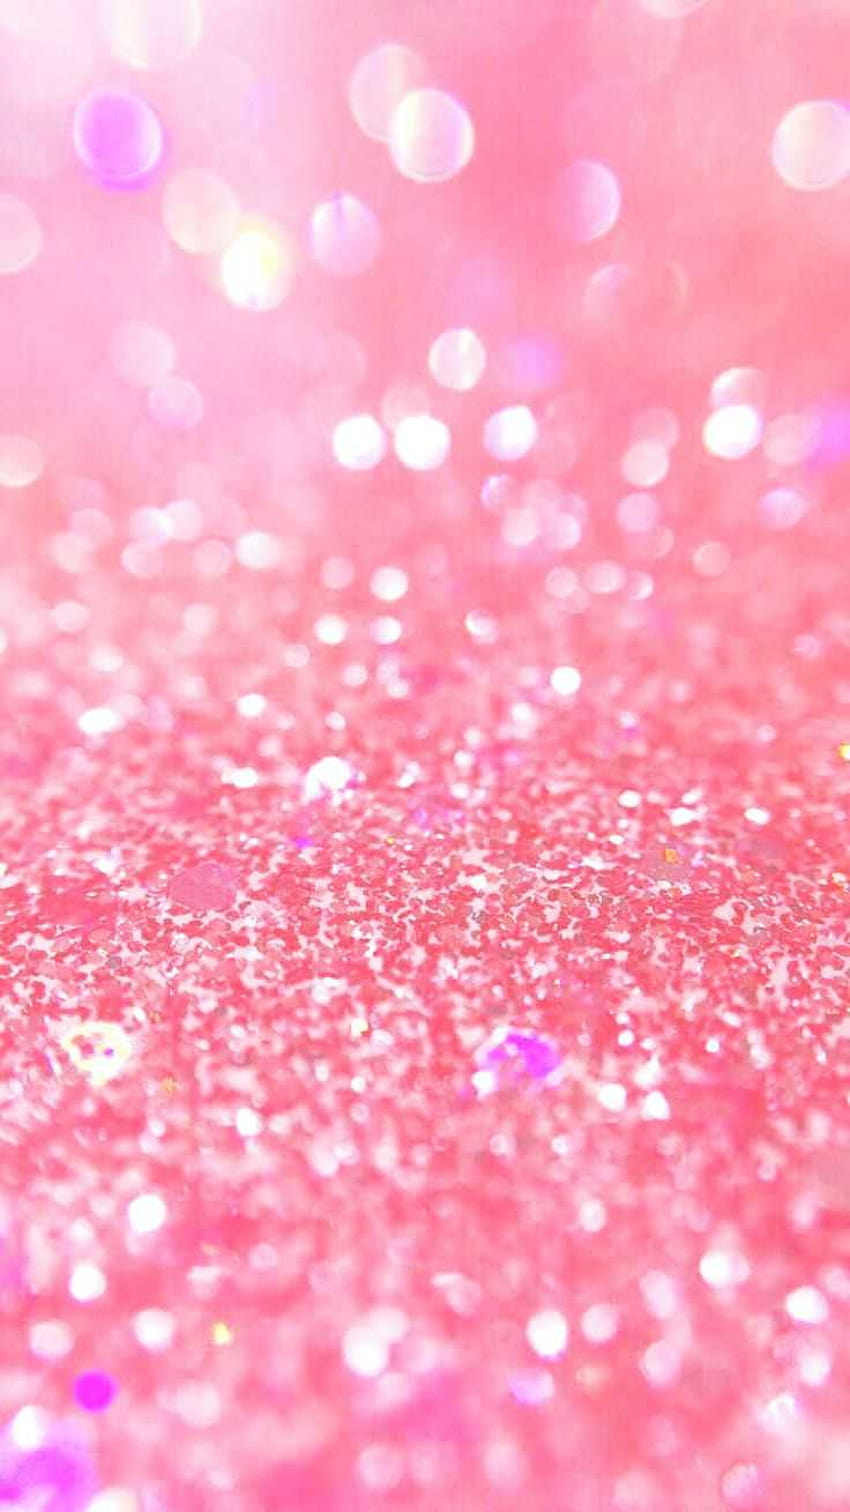 Pink Glitter Pics Of Mobile Phones Best Ideas About, best pink for phone HD phone wallpaper